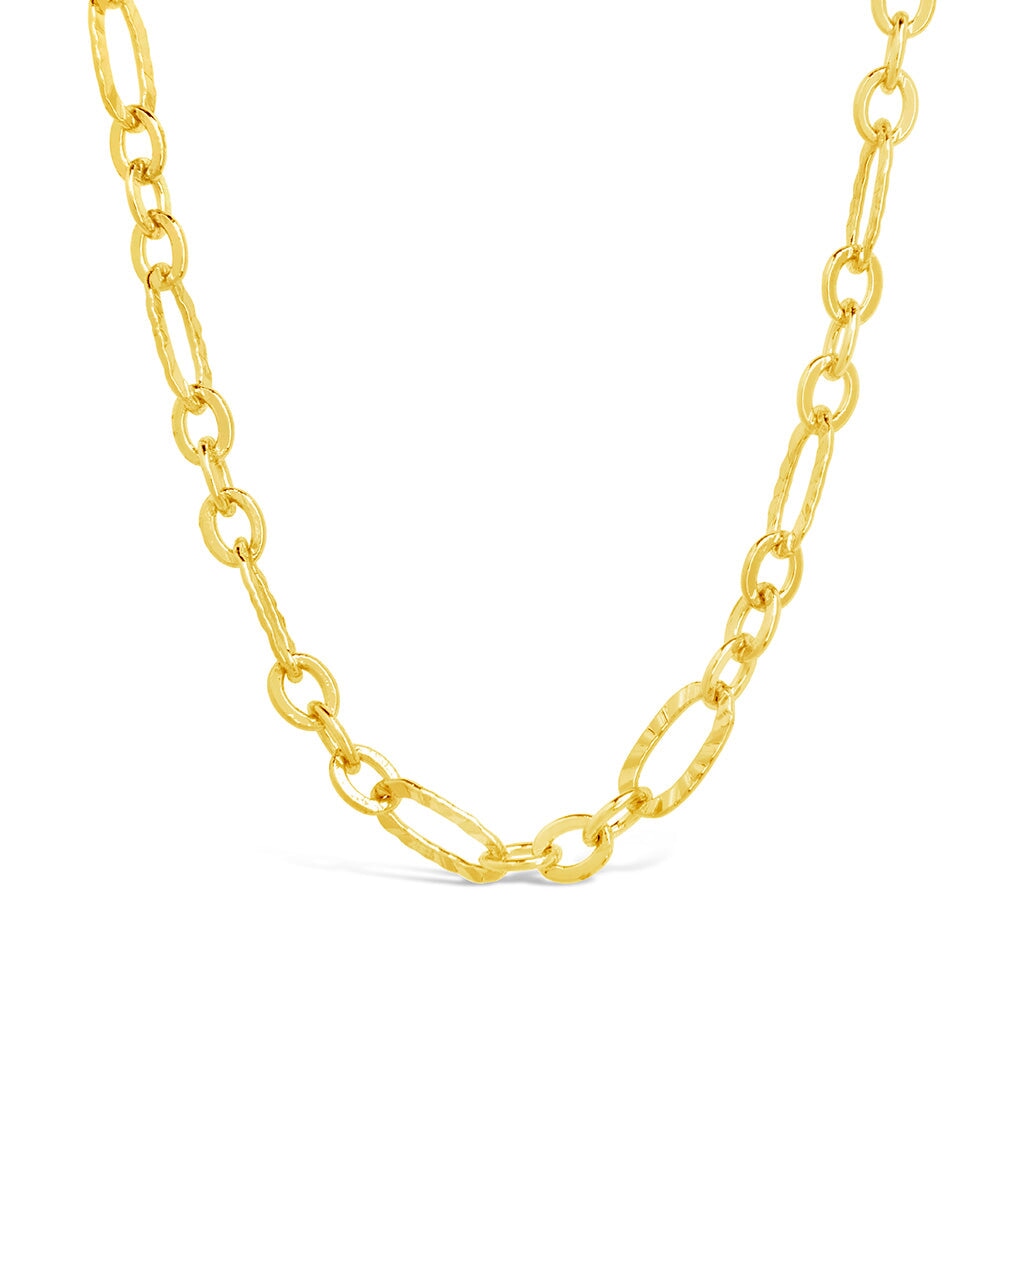 Elysia Chain Necklace Necklace Sterling Forever Gold 